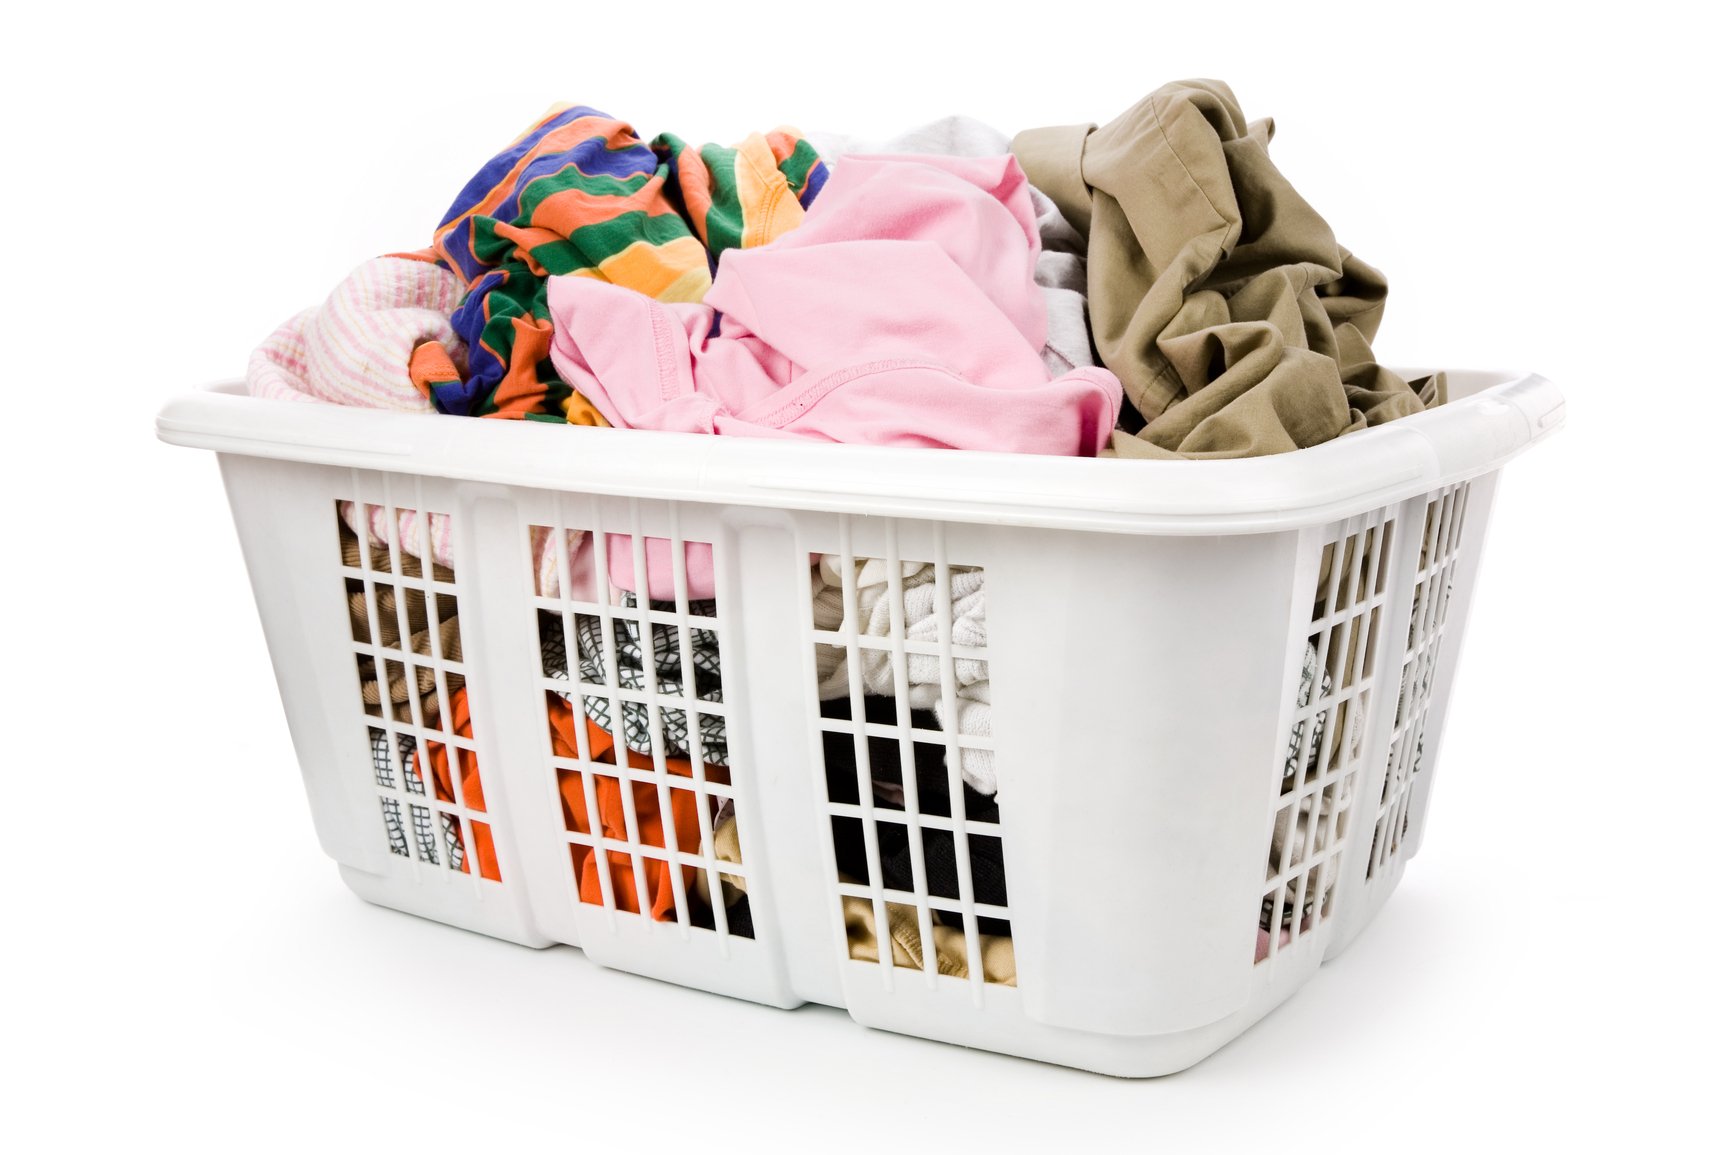 Грязная корзина на русском языке 24. Laundry Hamper for Kids. Take Dirty clothes from the Hamper. Hamper stuffing Filler Red.